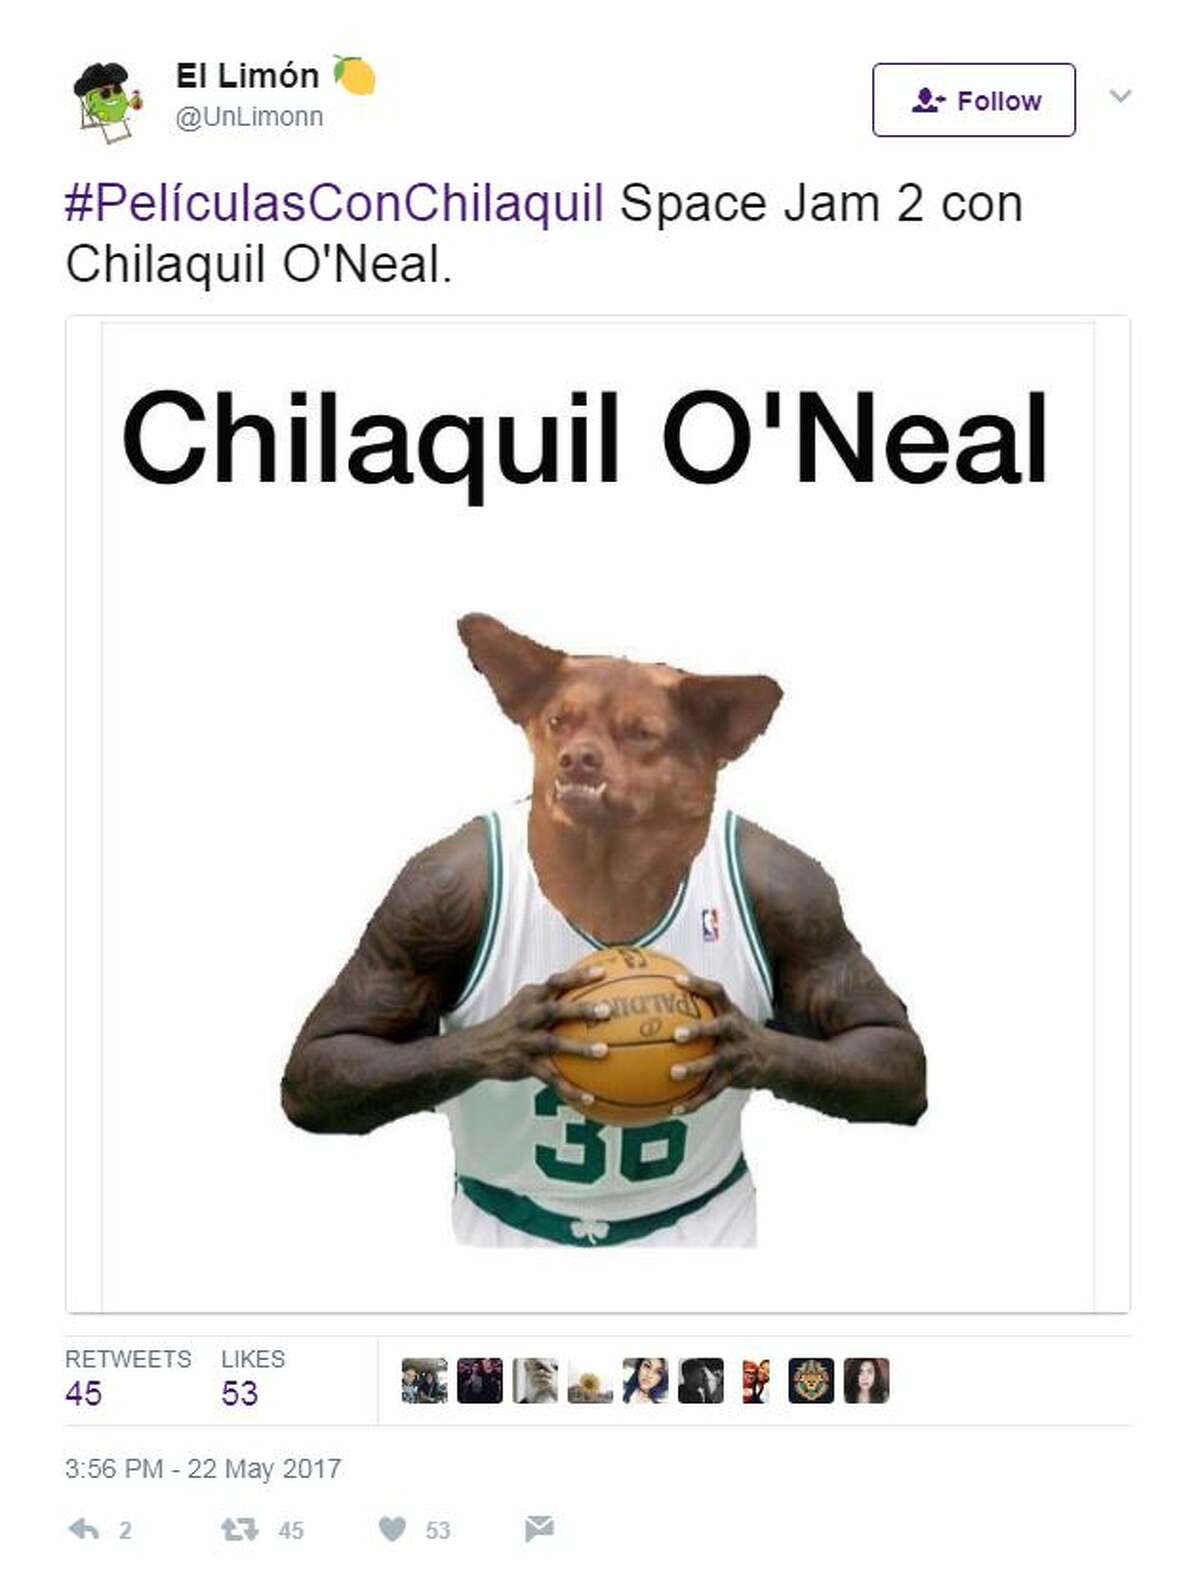 @UnLimonn: #PeliculasConChilaquil Space Jam 2 con Chilaquil O'Neal.